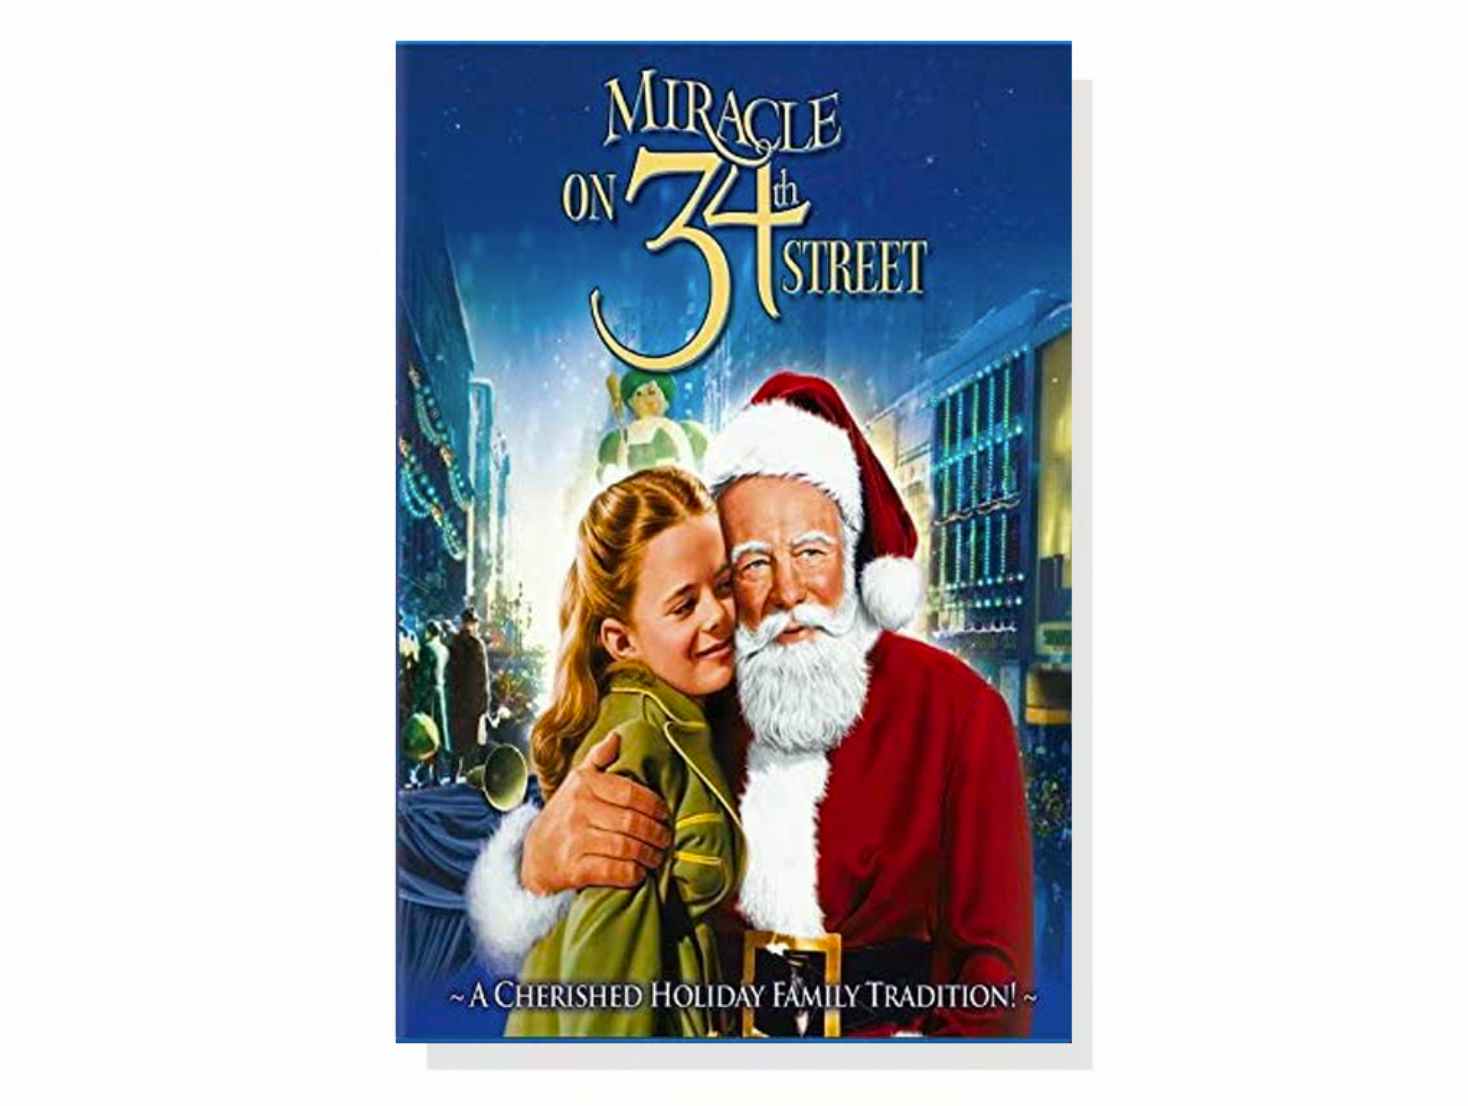 Movie poster for Miracle on 34th Street, one of the best Christmas movies on Disney Plus.